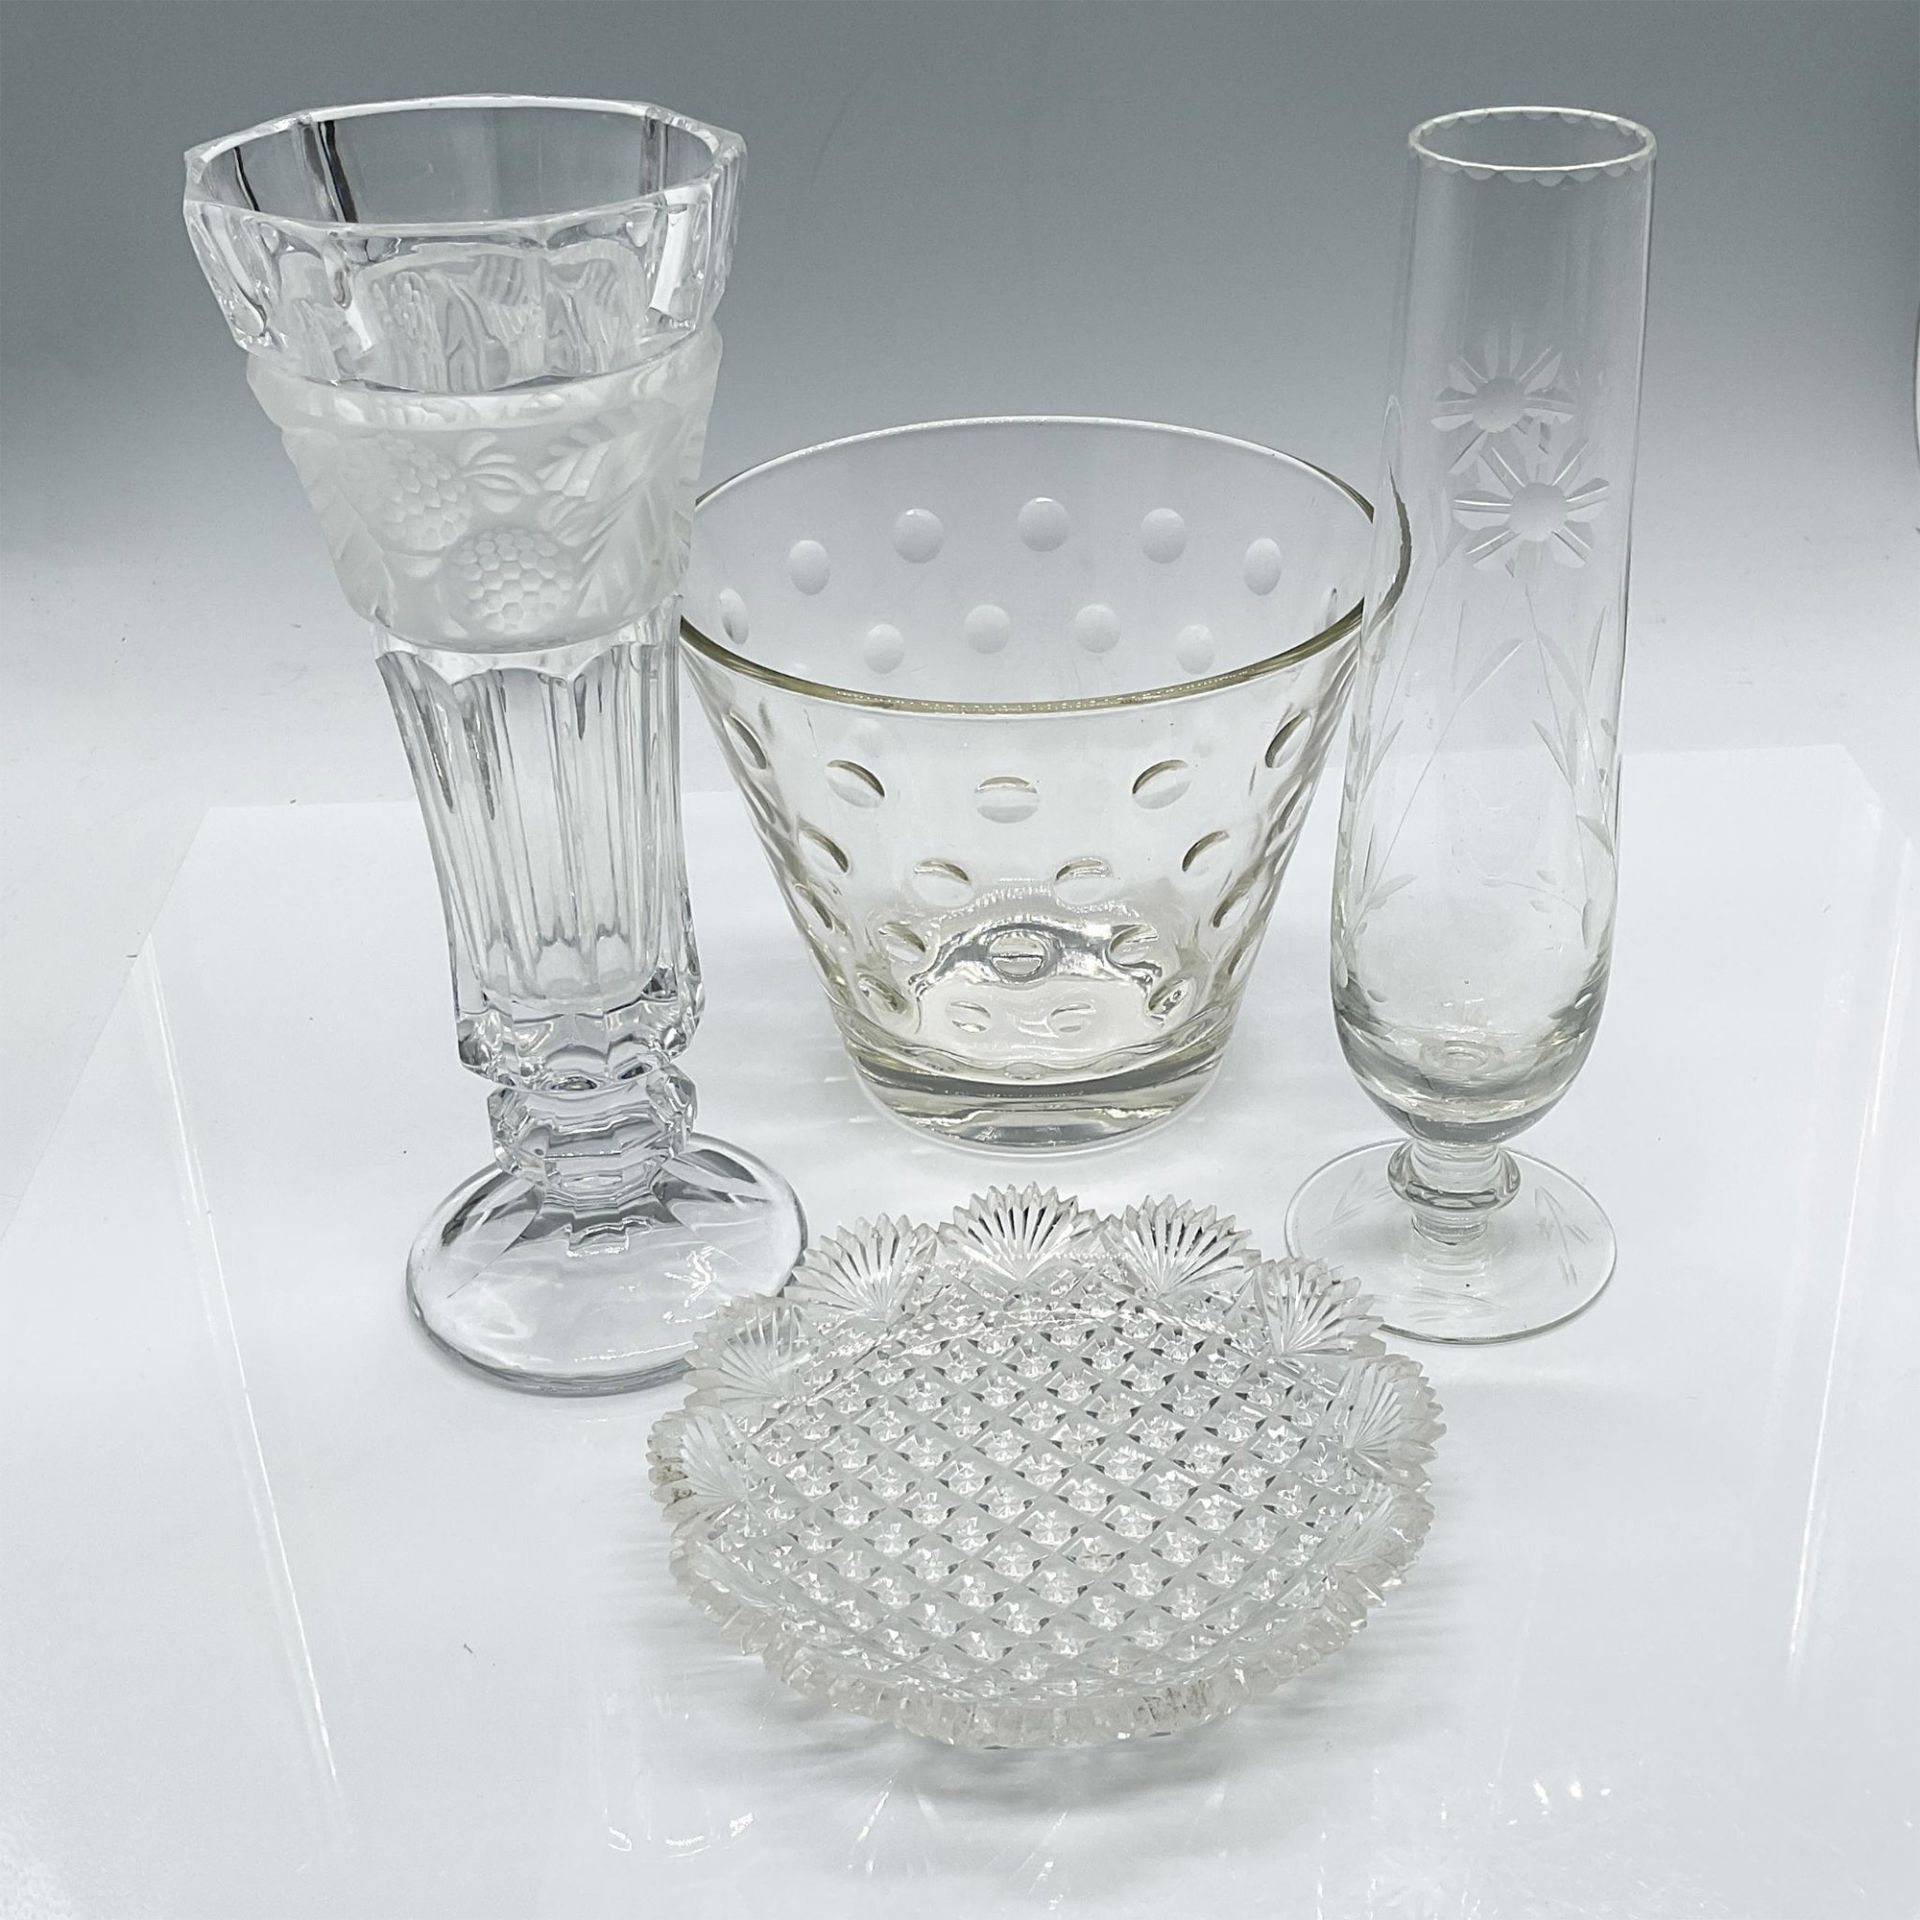 4pcs Glassware Vases and Dish and Ice Bucket - Image 2 of 3